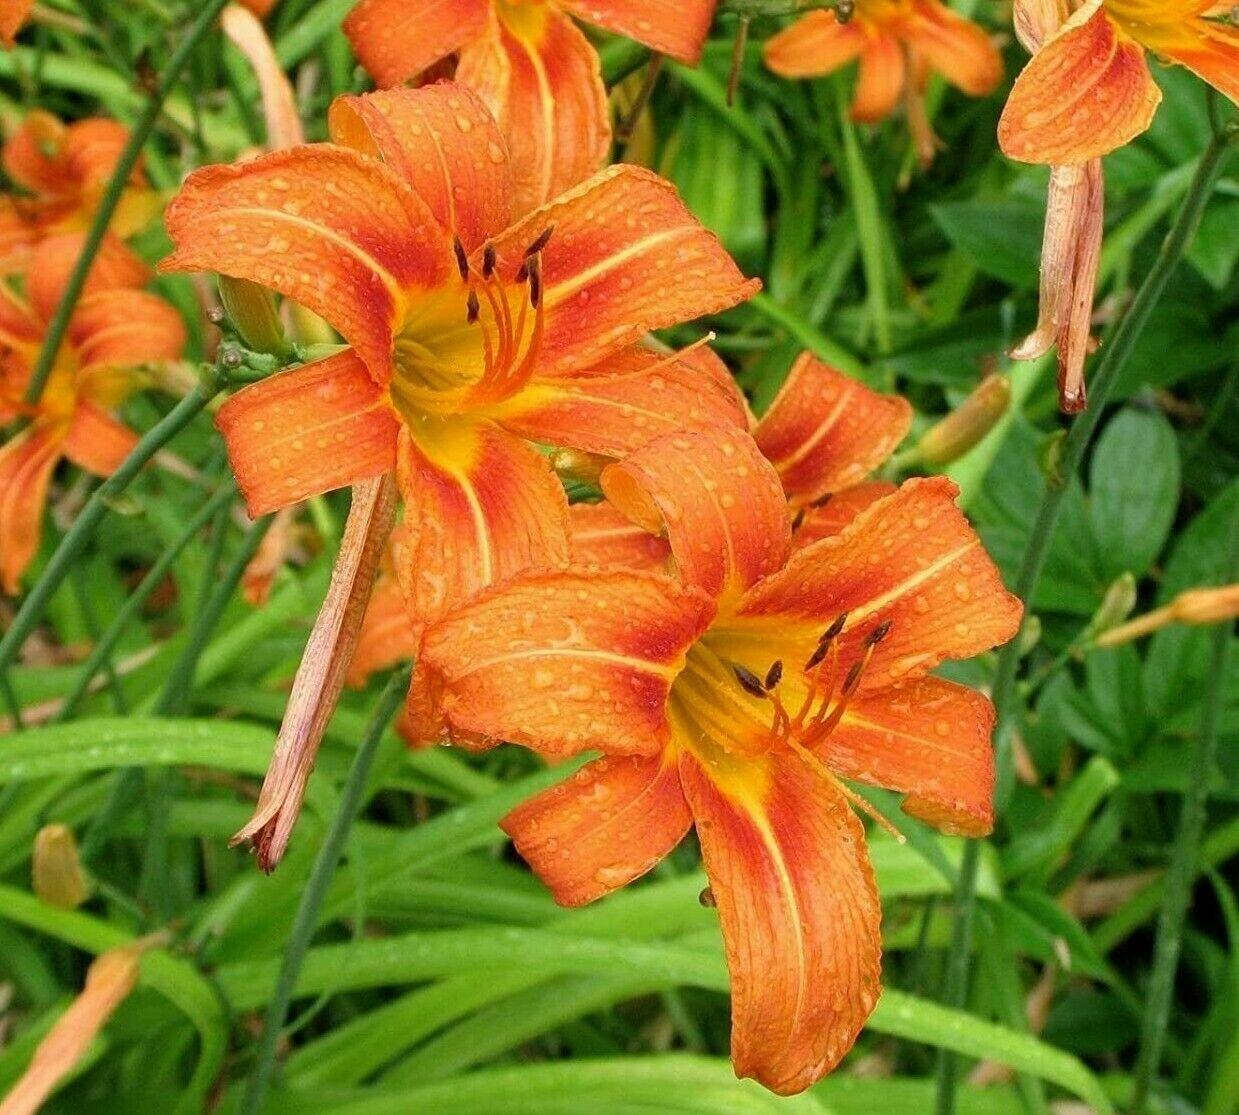 50 Orange Daylily Plants - Ditch/Tawny Day Lily Flowers - Medium Roots, Bareroot - The Nursery Center